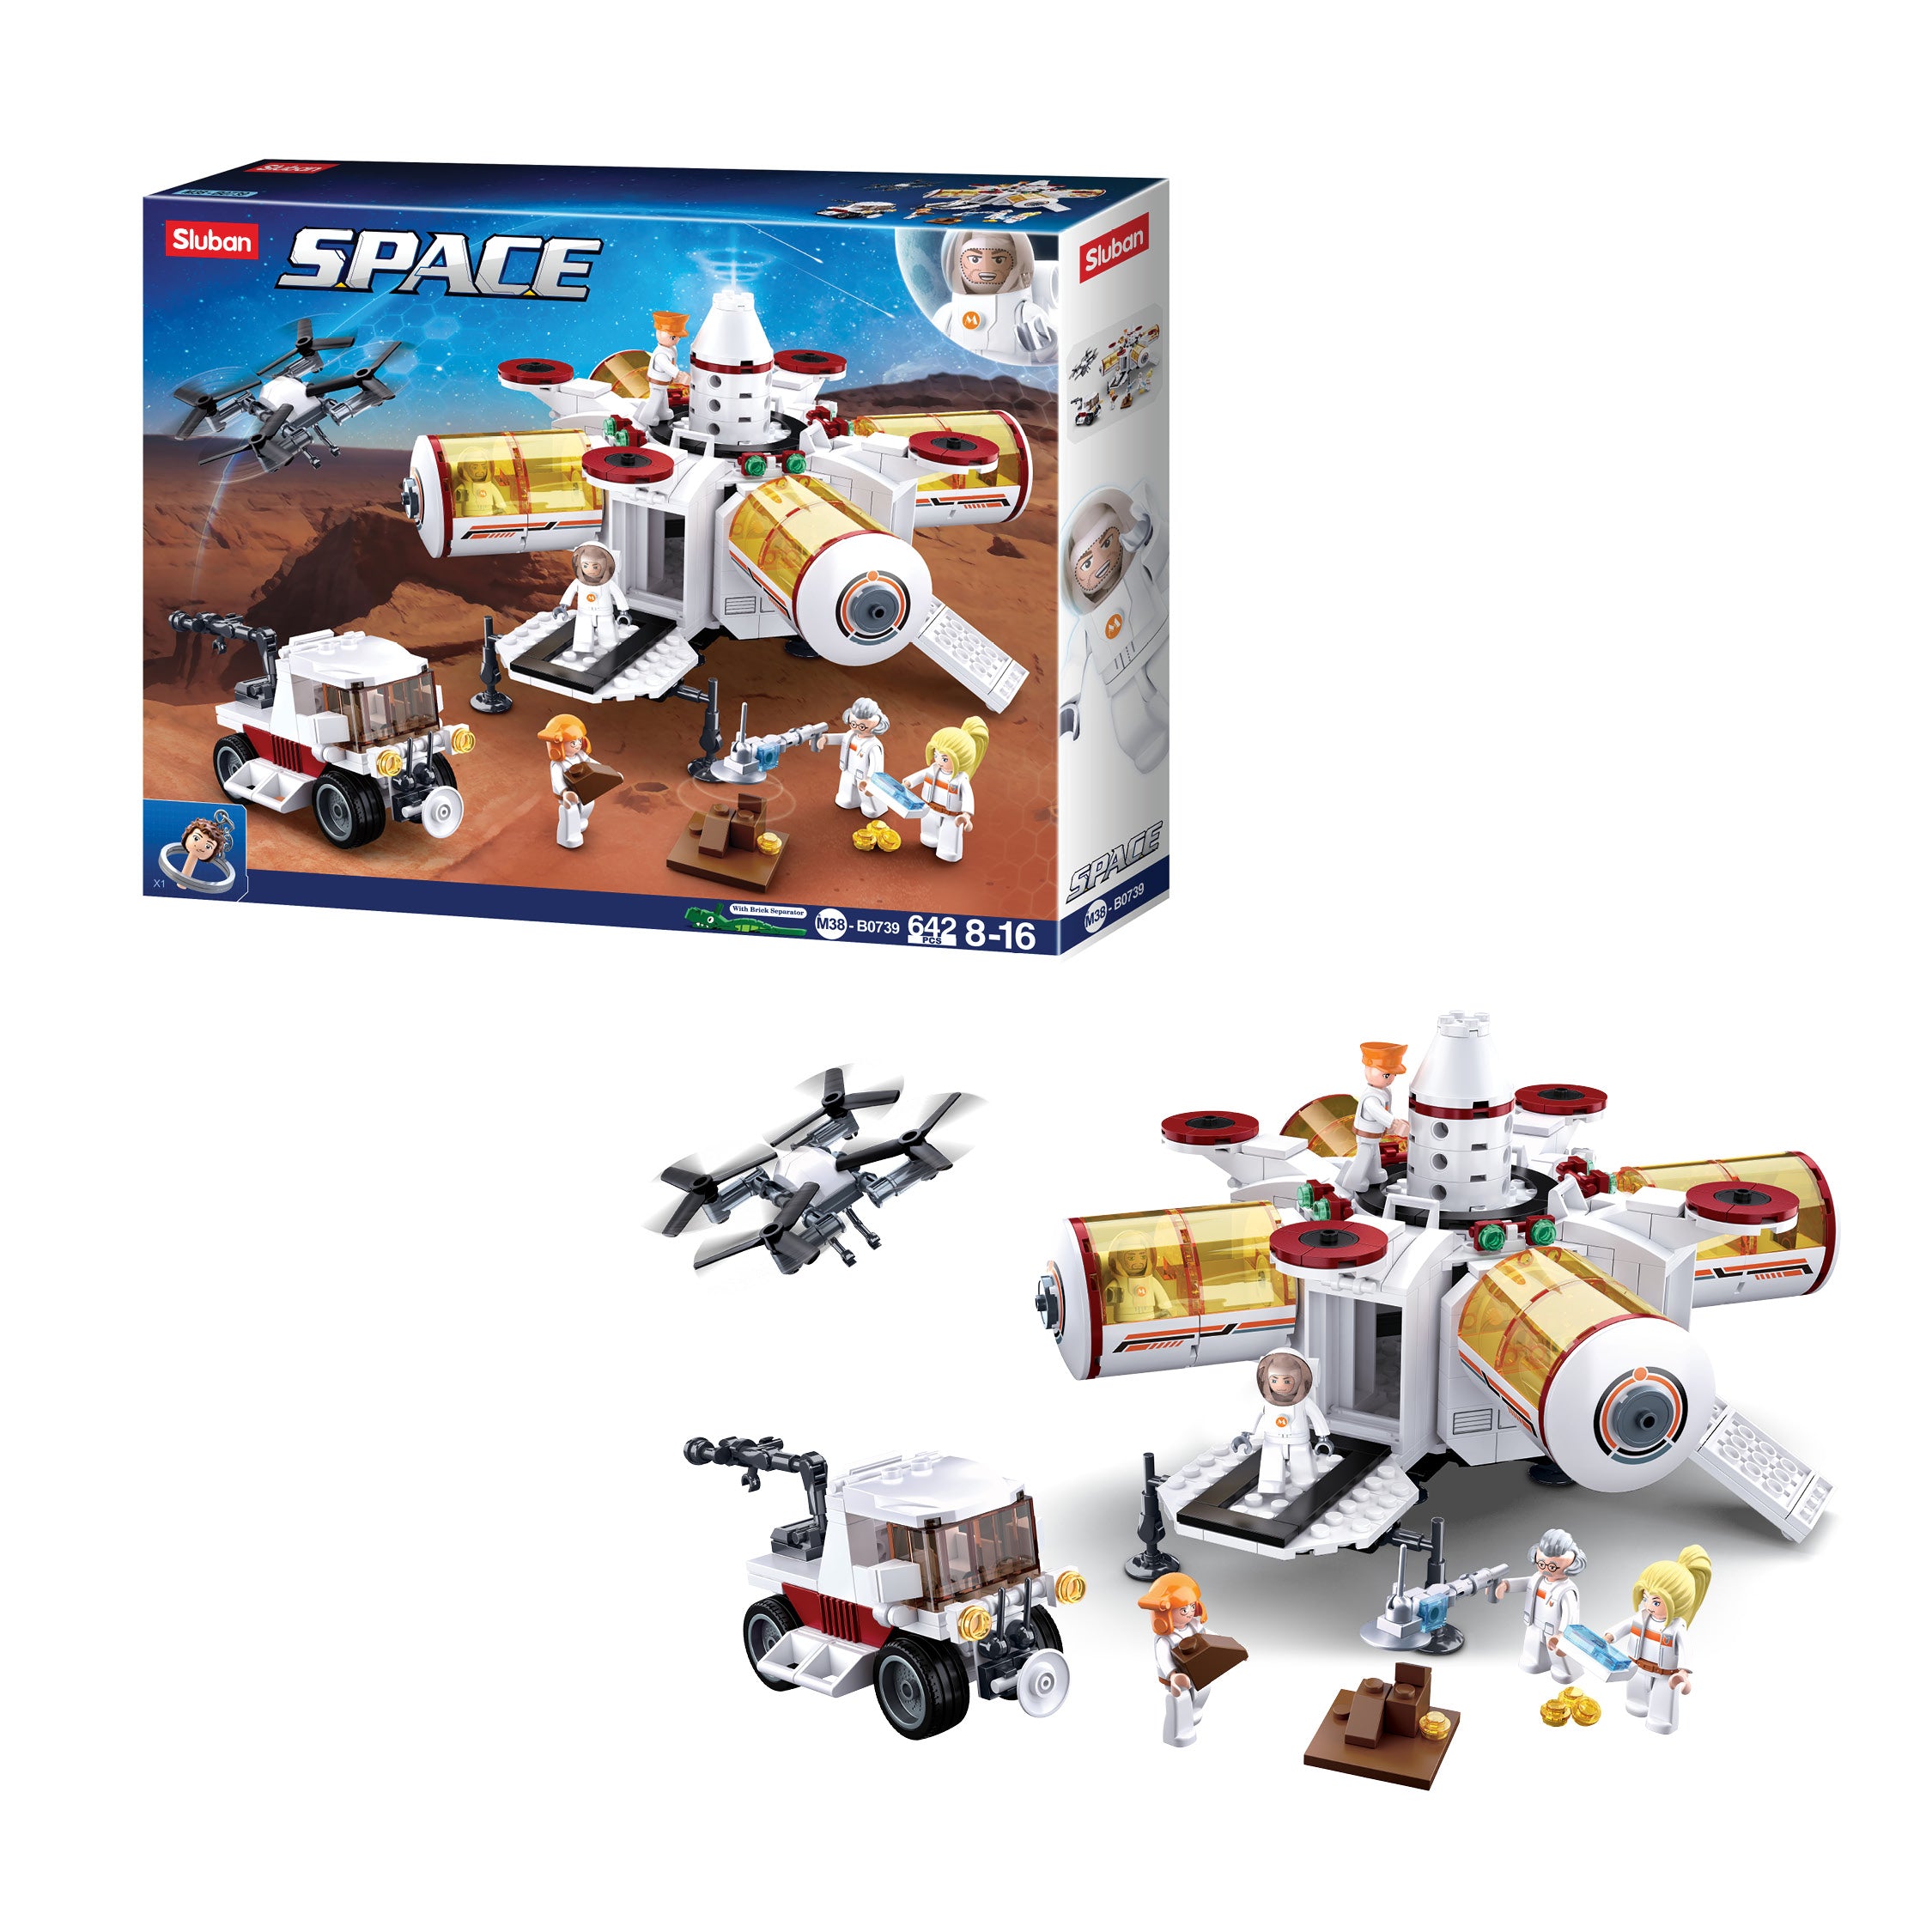 Sluban® Space-Space Base(642Pcs) M38-B0739 (642 Pcs) Building Blocks Kit For Boys And Girls Aged 8 Years And Above Creative Construction Set Educational Stem Toy, Blocks Compatible With Other Leading Brands, Bis Certified.